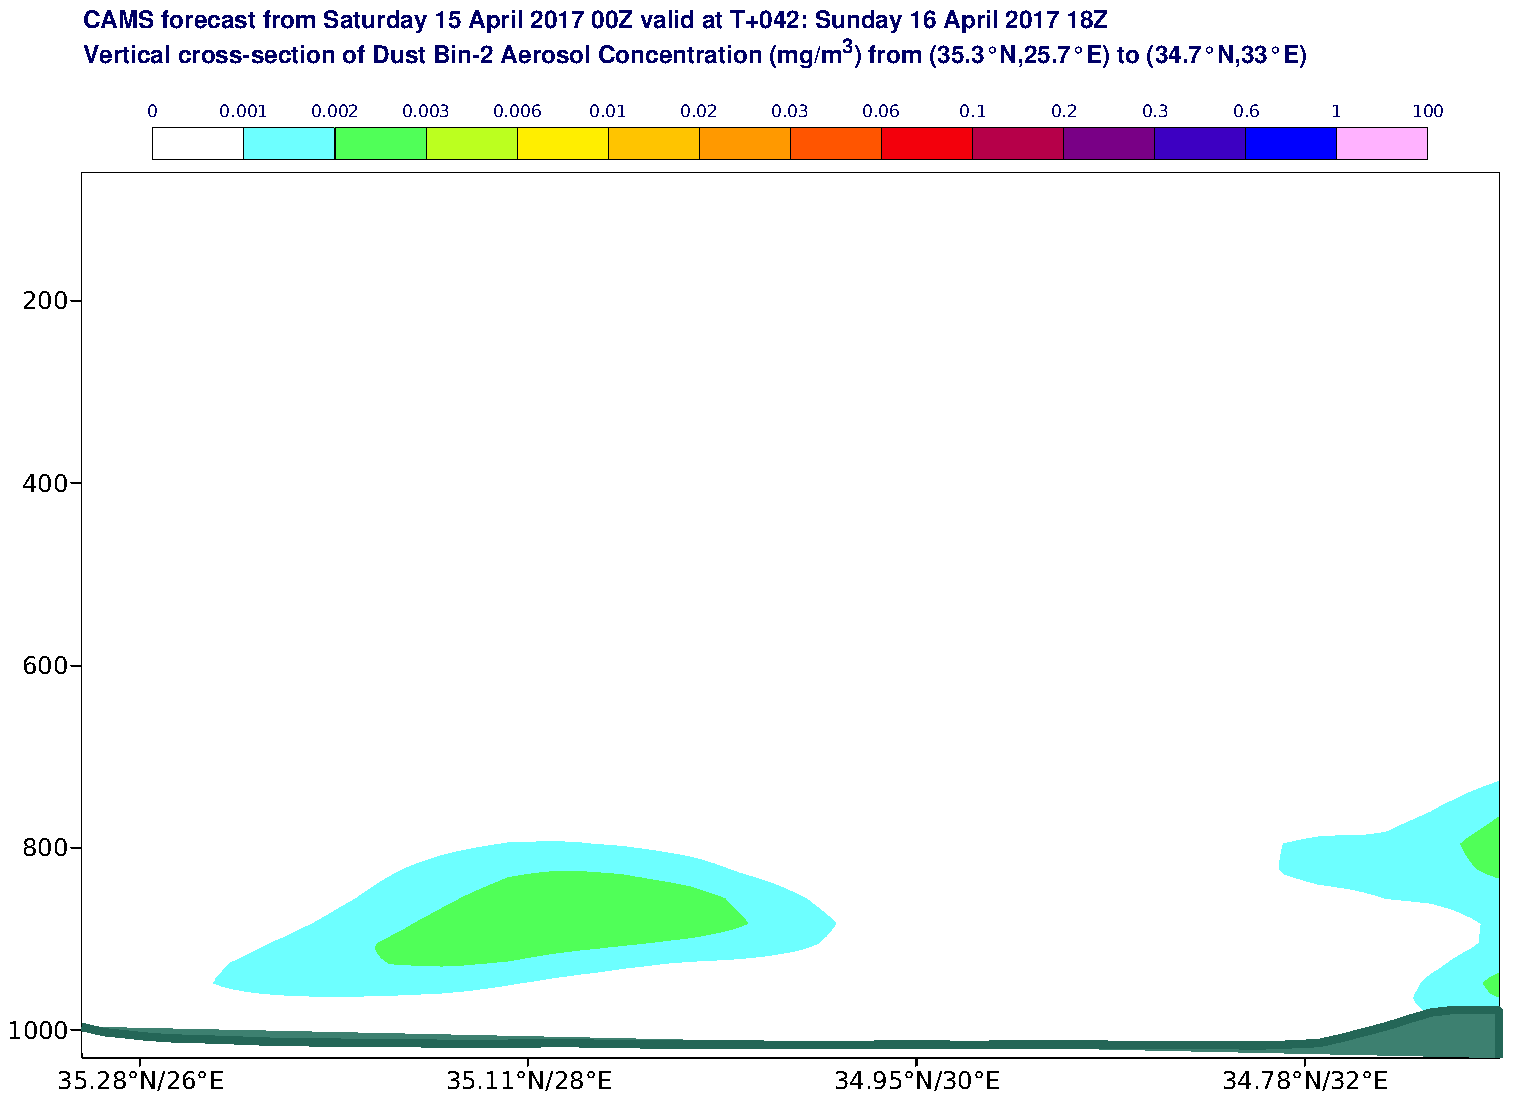 Vertical cross-section of Dust Bin-2 Aerosol Concentration (mg/m3) valid at T42 - 2017-04-16 18:00